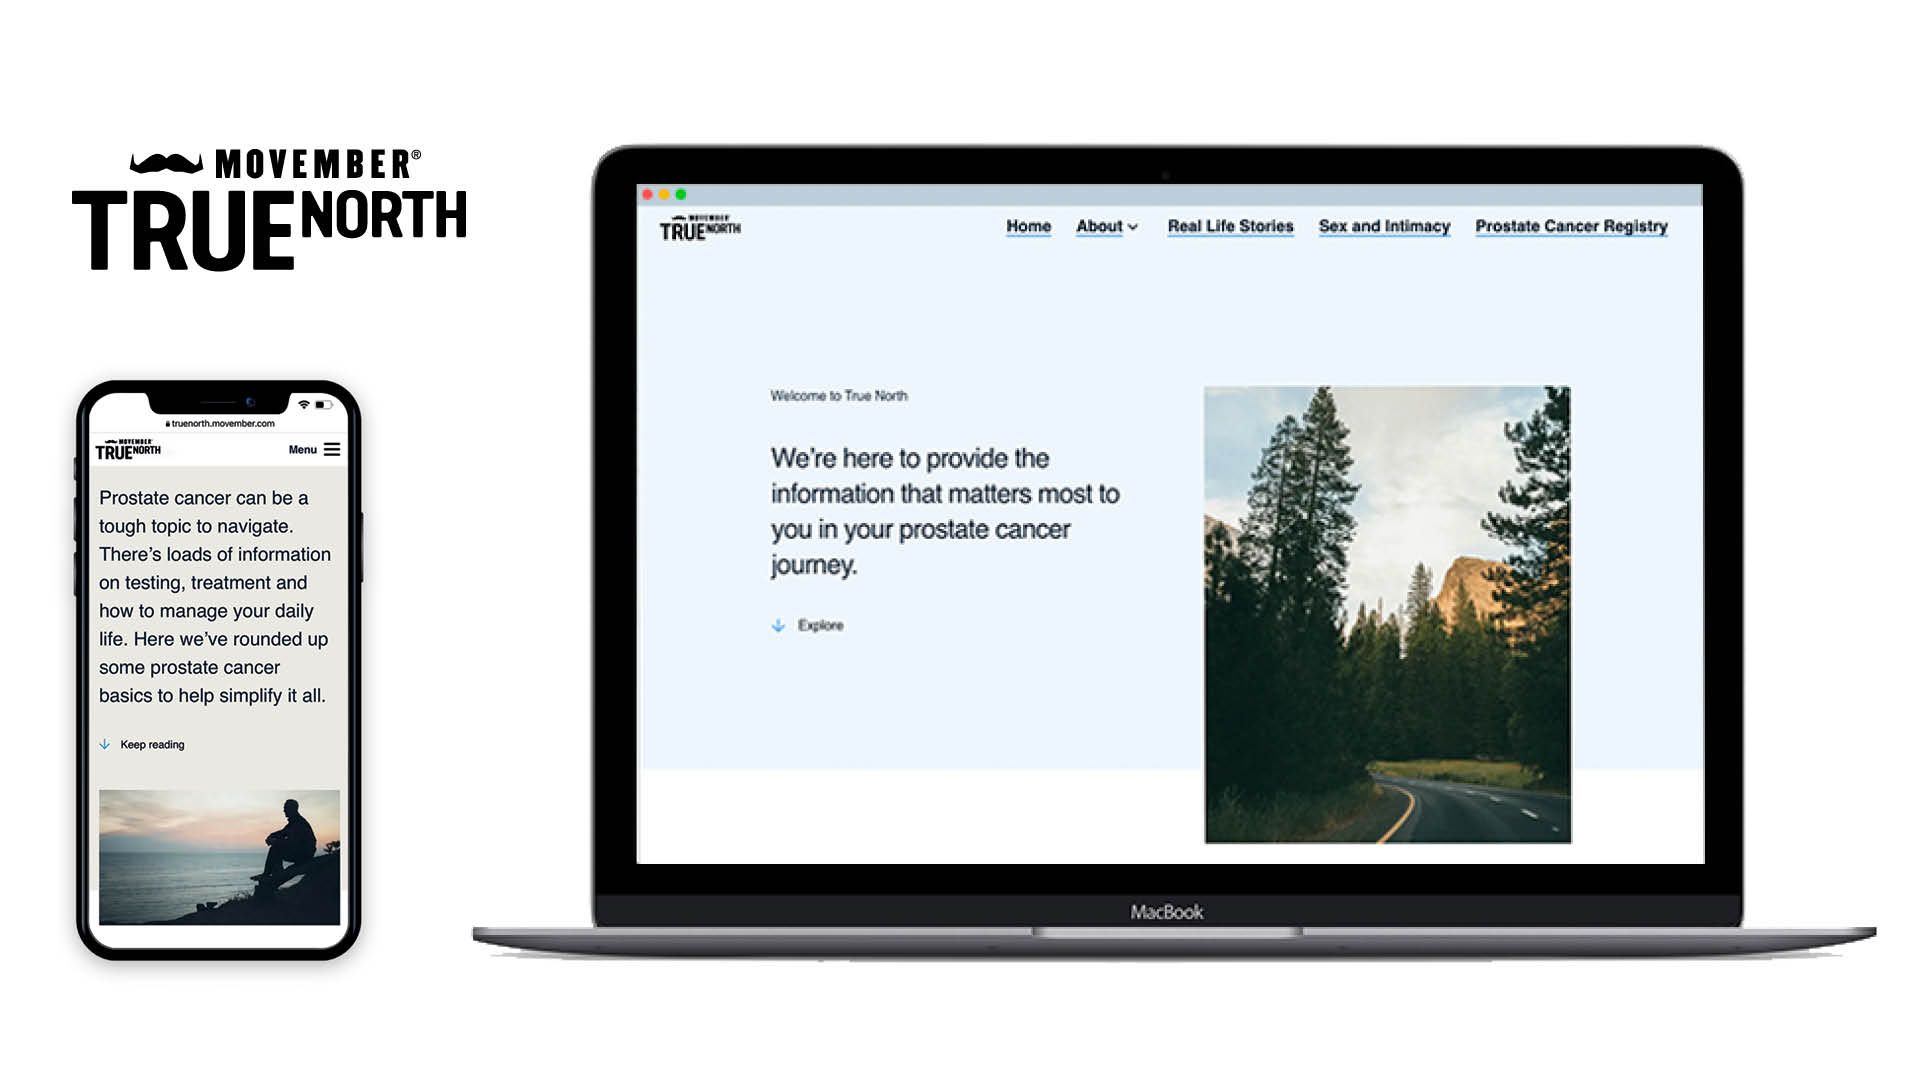 Screen captures showing the desktop and mobile interface of the Movember True North website.